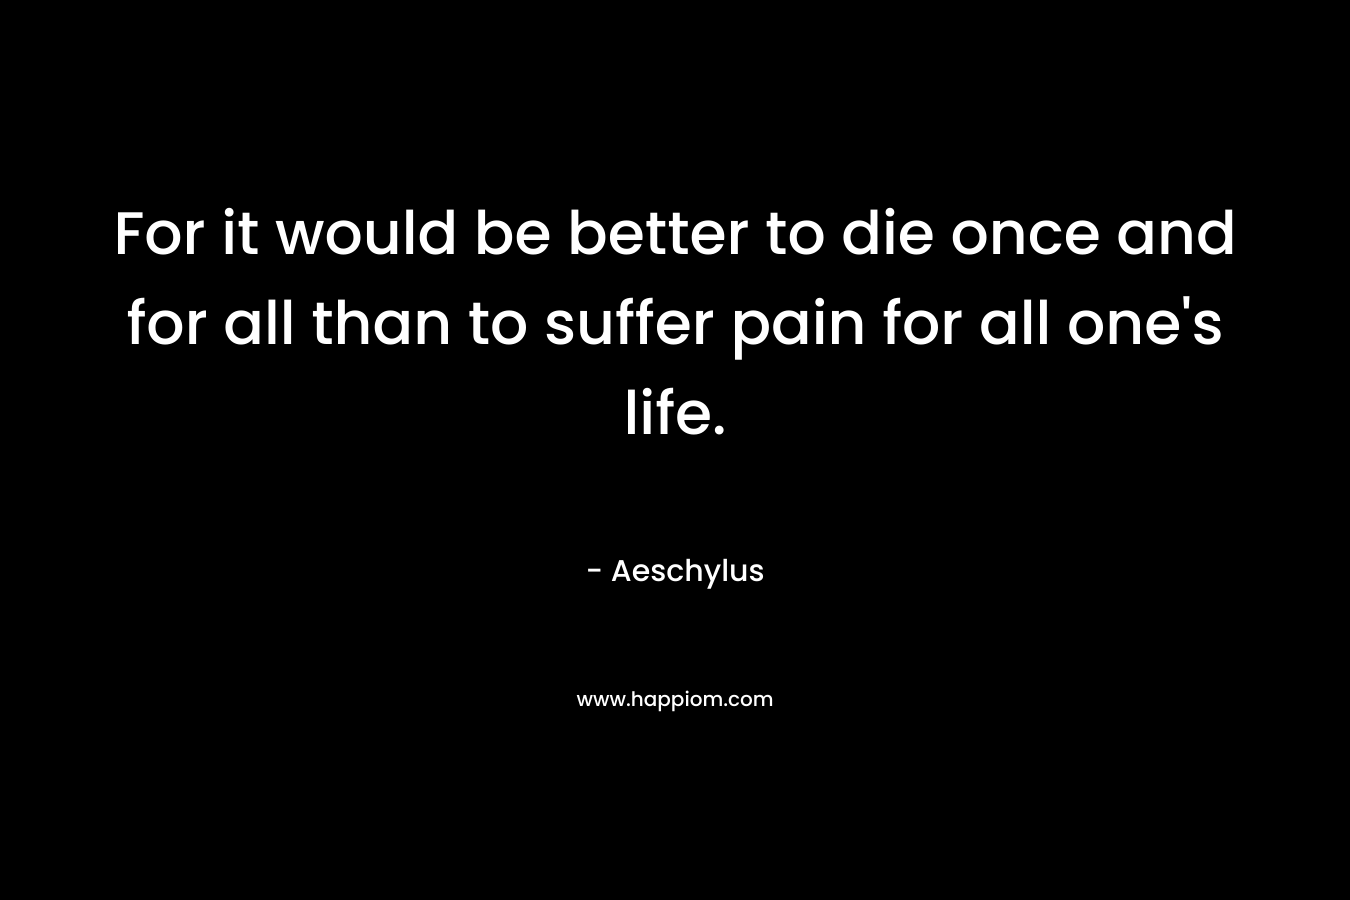 For it would be better to die once and for all than to suffer pain for all one's life.